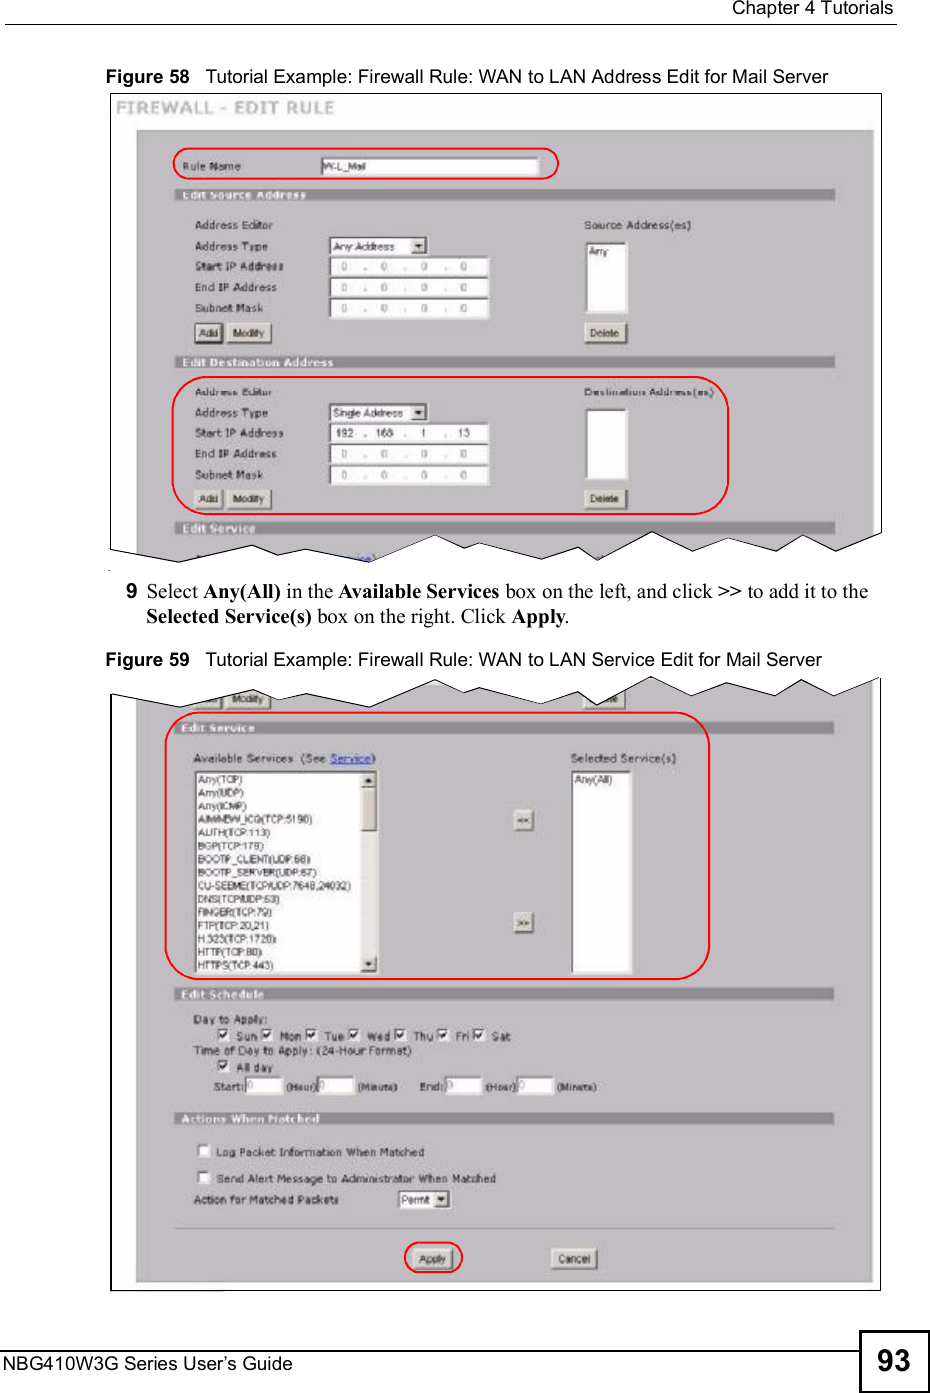  Chapter 4TutorialsNBG410W3G Series User s Guide 93Figure 58   Tutorial Example: Firewall Rule: WAN to LAN Address Edit for Mail Server 9Select Any(All) in the Available Services box on the left, and click &gt;&gt; to add it to the Selected Service(s) box on the right. Click Apply.Figure 59   Tutorial Example: Firewall Rule: WAN to LAN Service Edit for Mail Server 